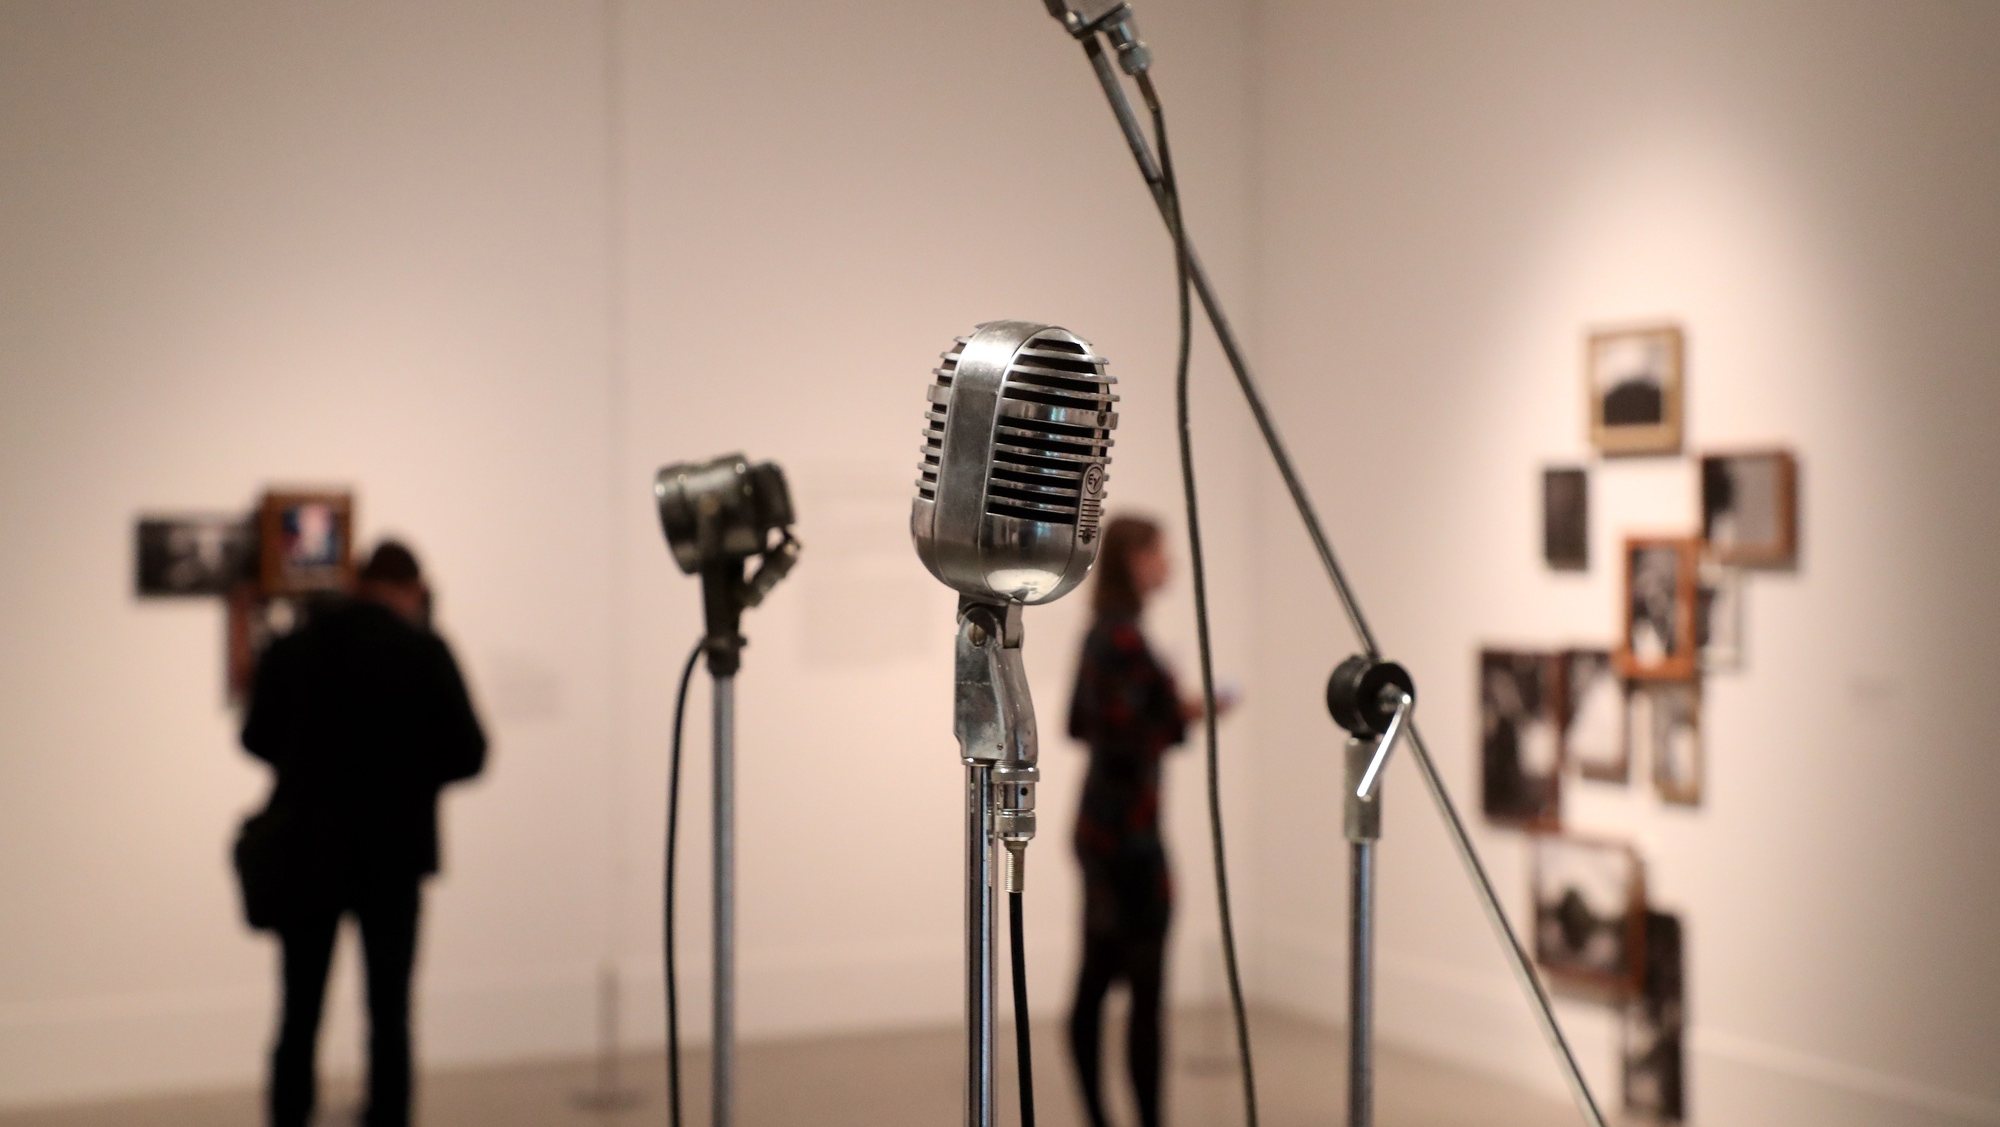 epa07452755 Microphones on display at the exhibition &#039;Michael Jackson: On the Wall&#039; during a press preview at the Bundeskunsthalle in Bonn, Germany, 21 March 2019. The show explores the influence of late US musician Michael Jackson in contemporary art. The exhibition runs from 22 March to 14 July 2019.  EPA/FRIEDEMANN VOGEL